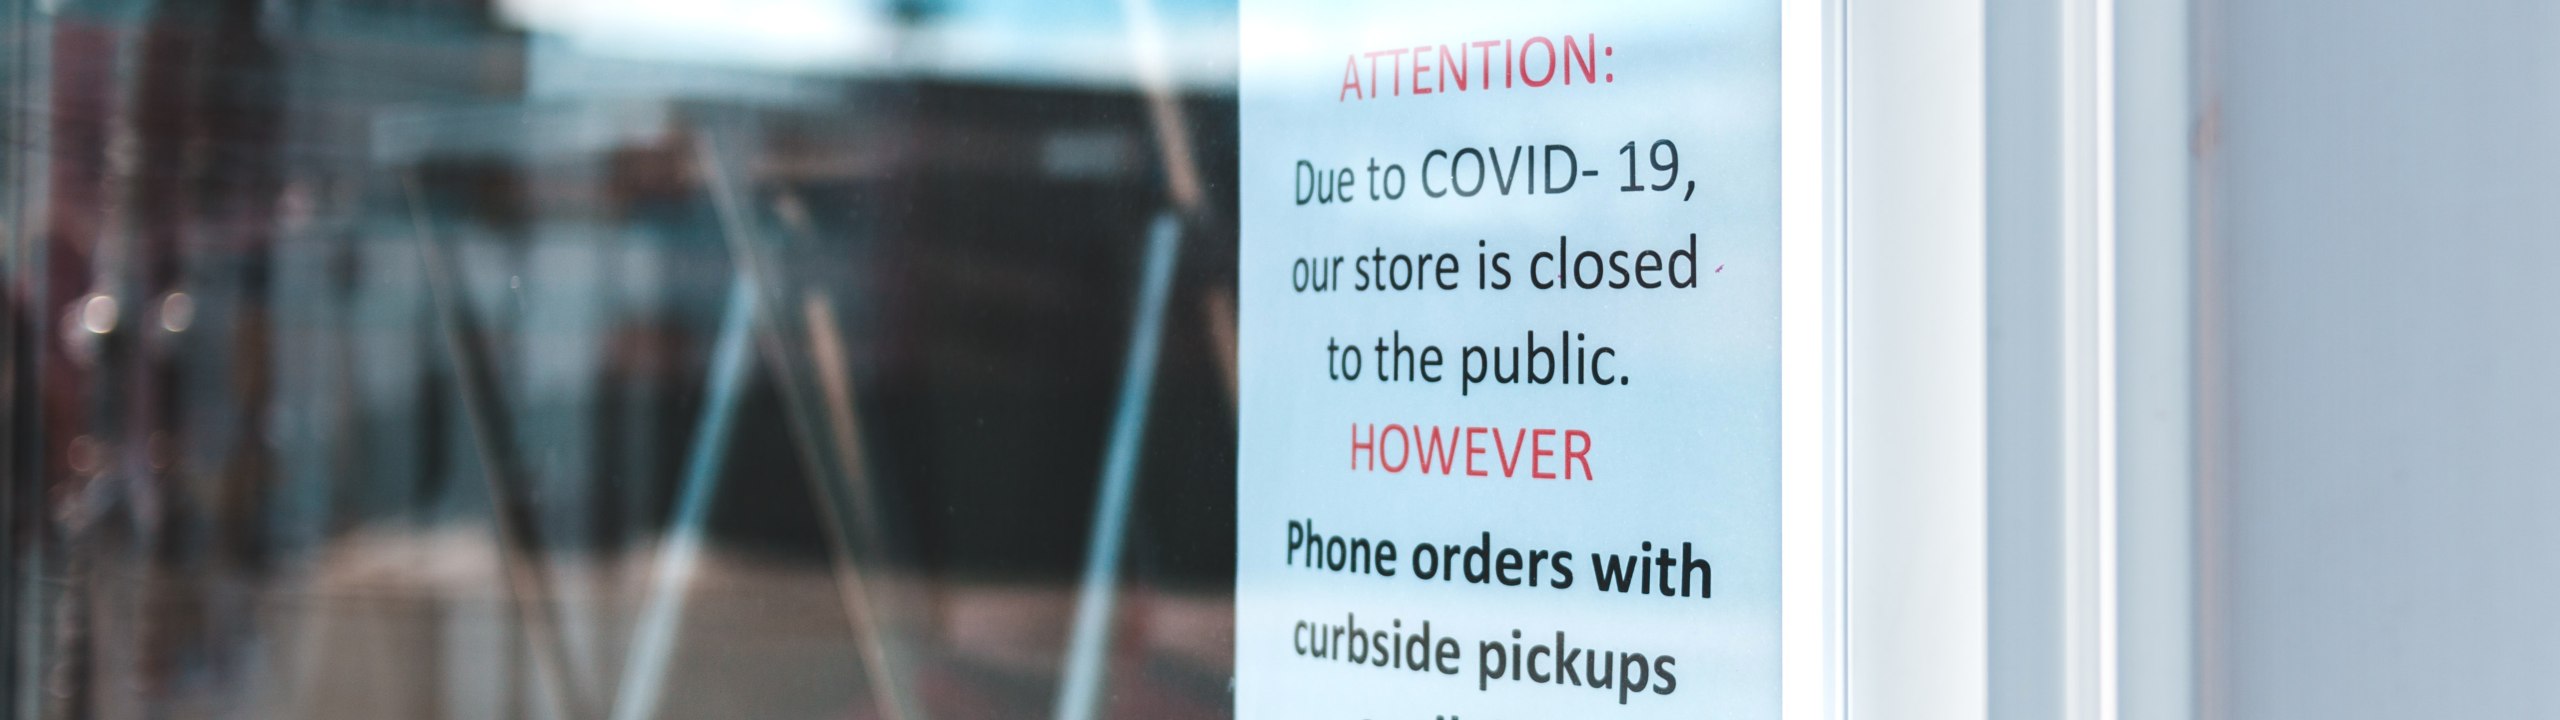 COVID-19 closure sign in storefront window